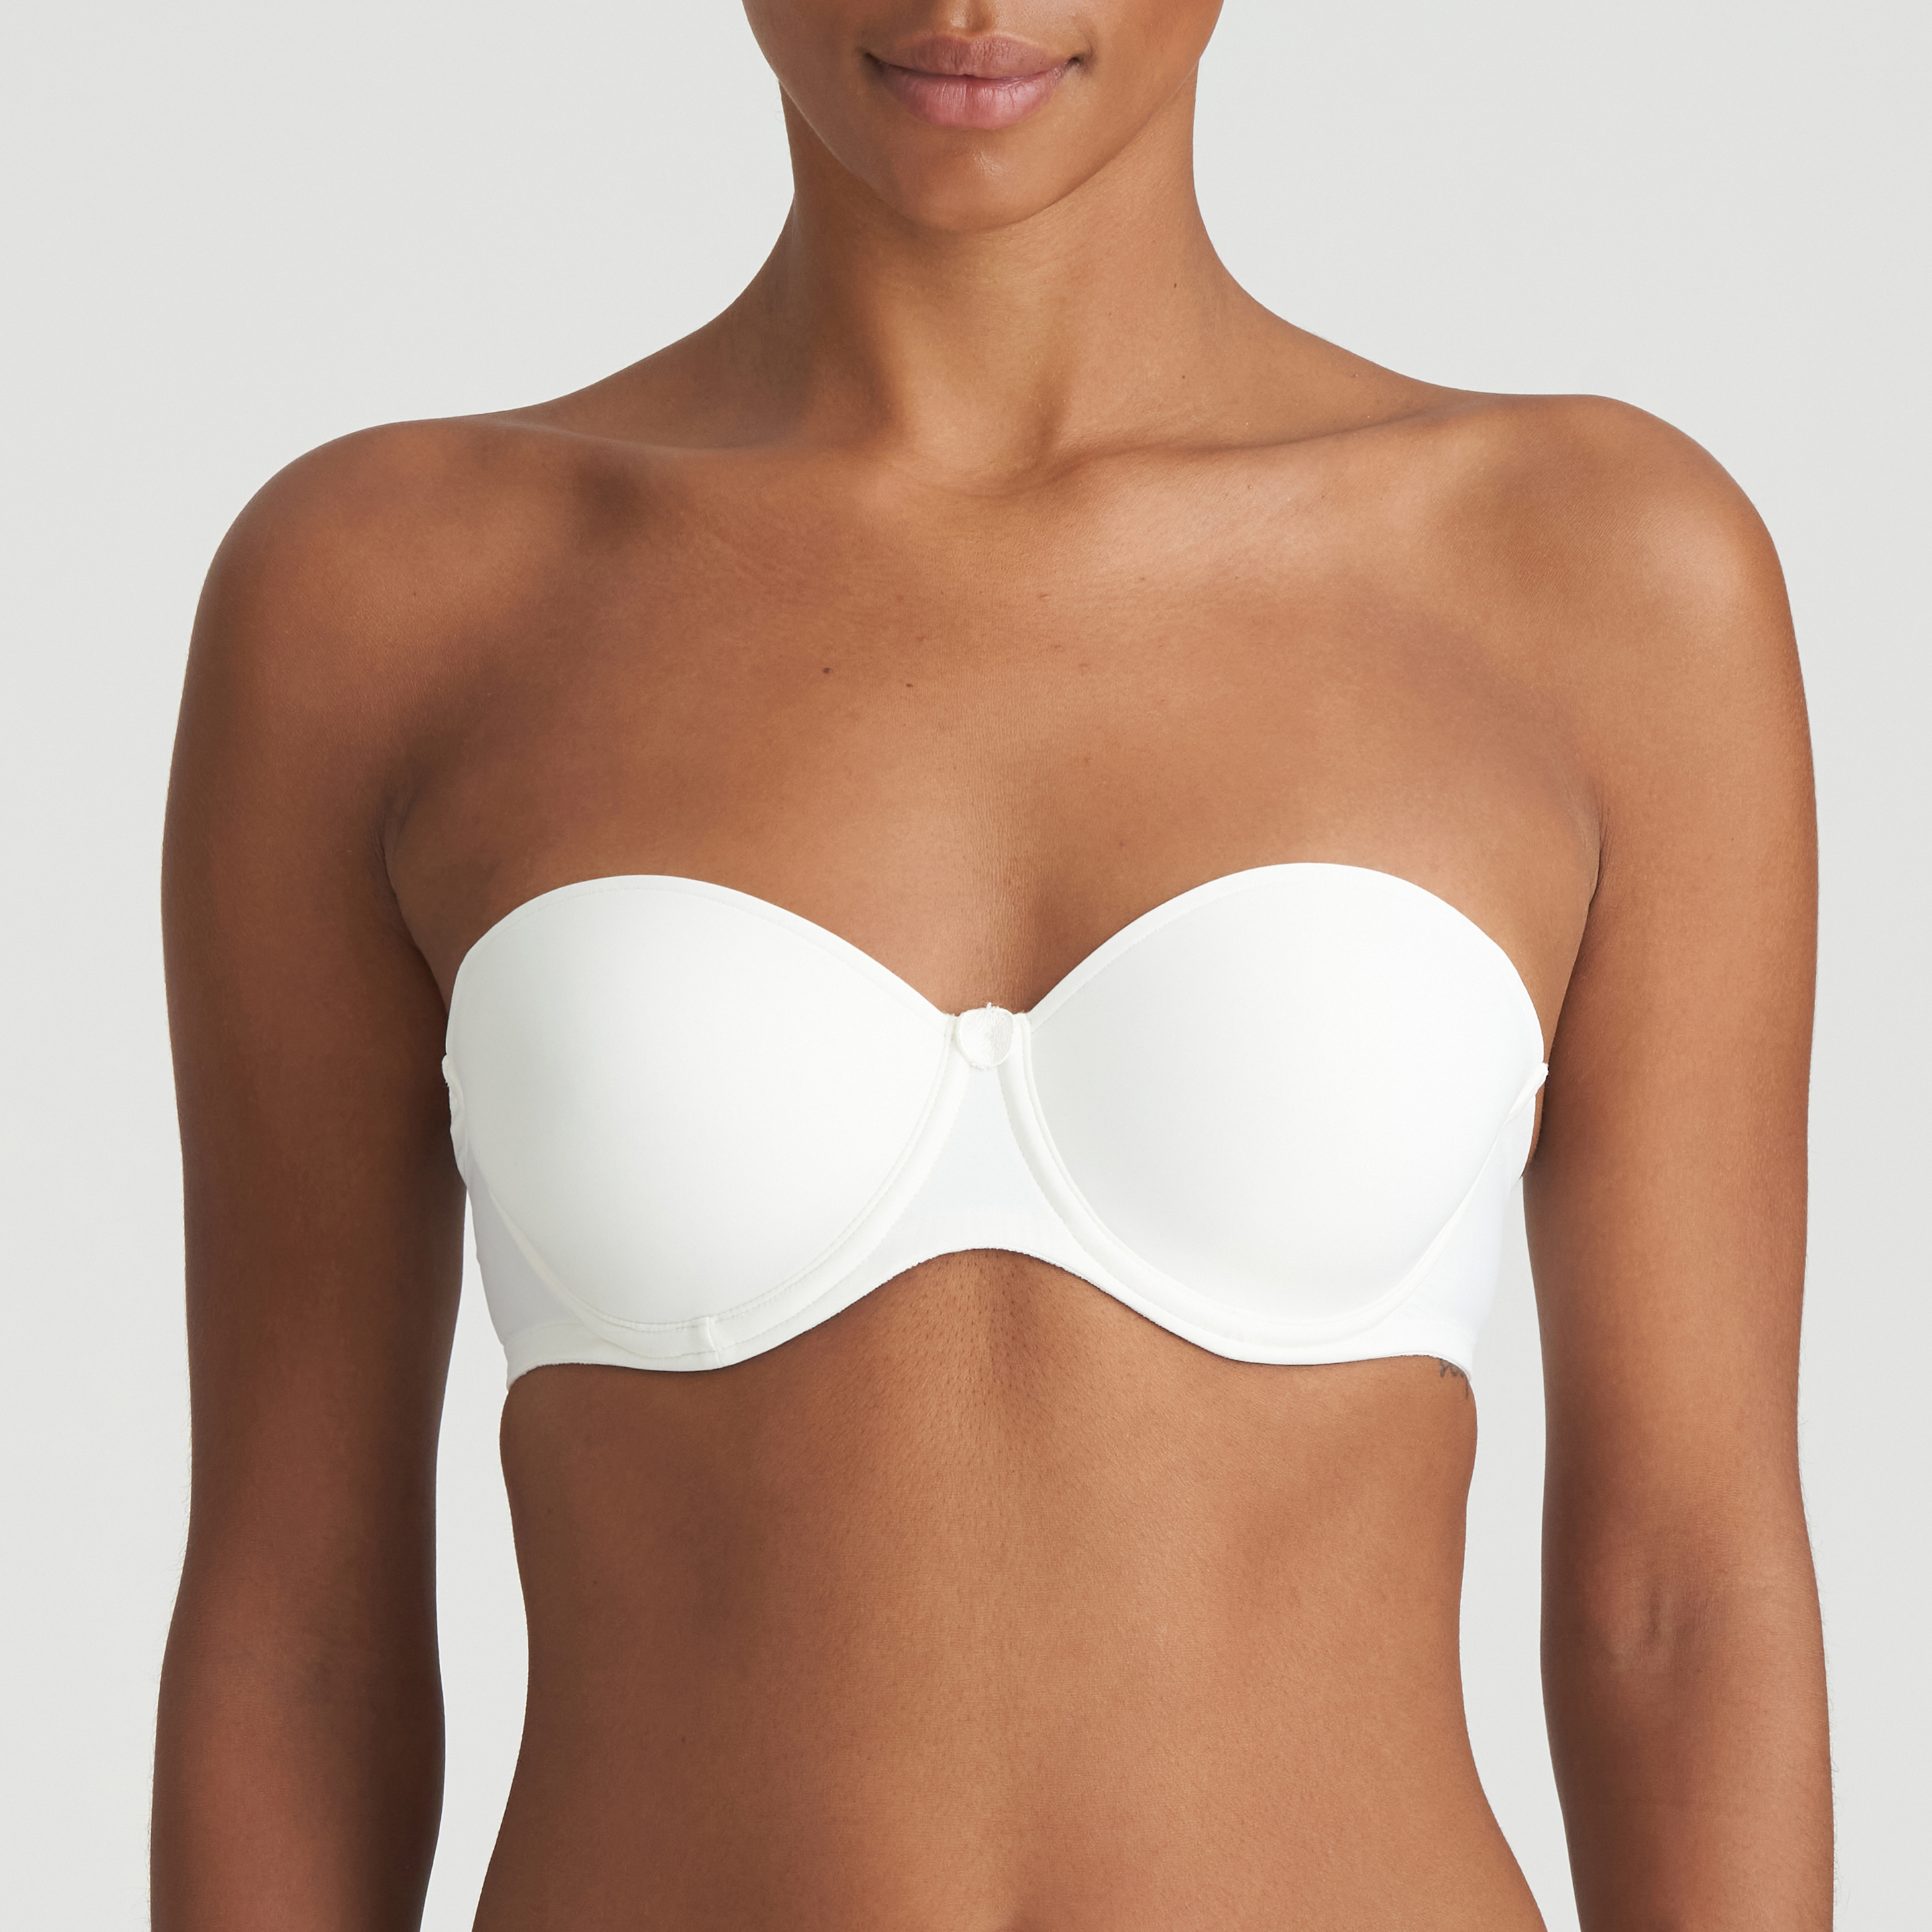 QCMGMG Bras for Women Full Coverage Strapless Iceland